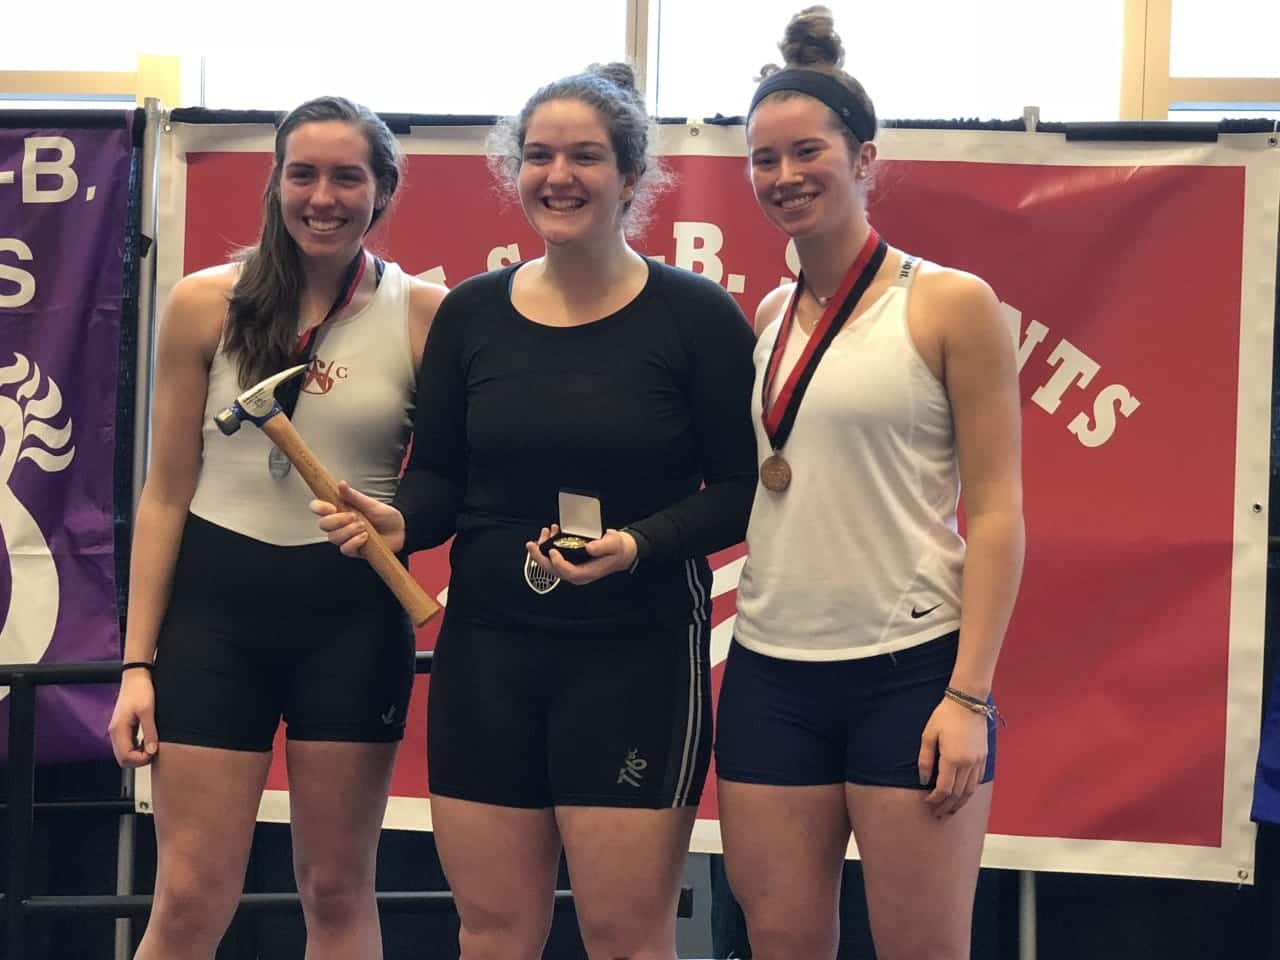 Sydney Kend, center, recently won gold in a prestigious indoor rowing competition.